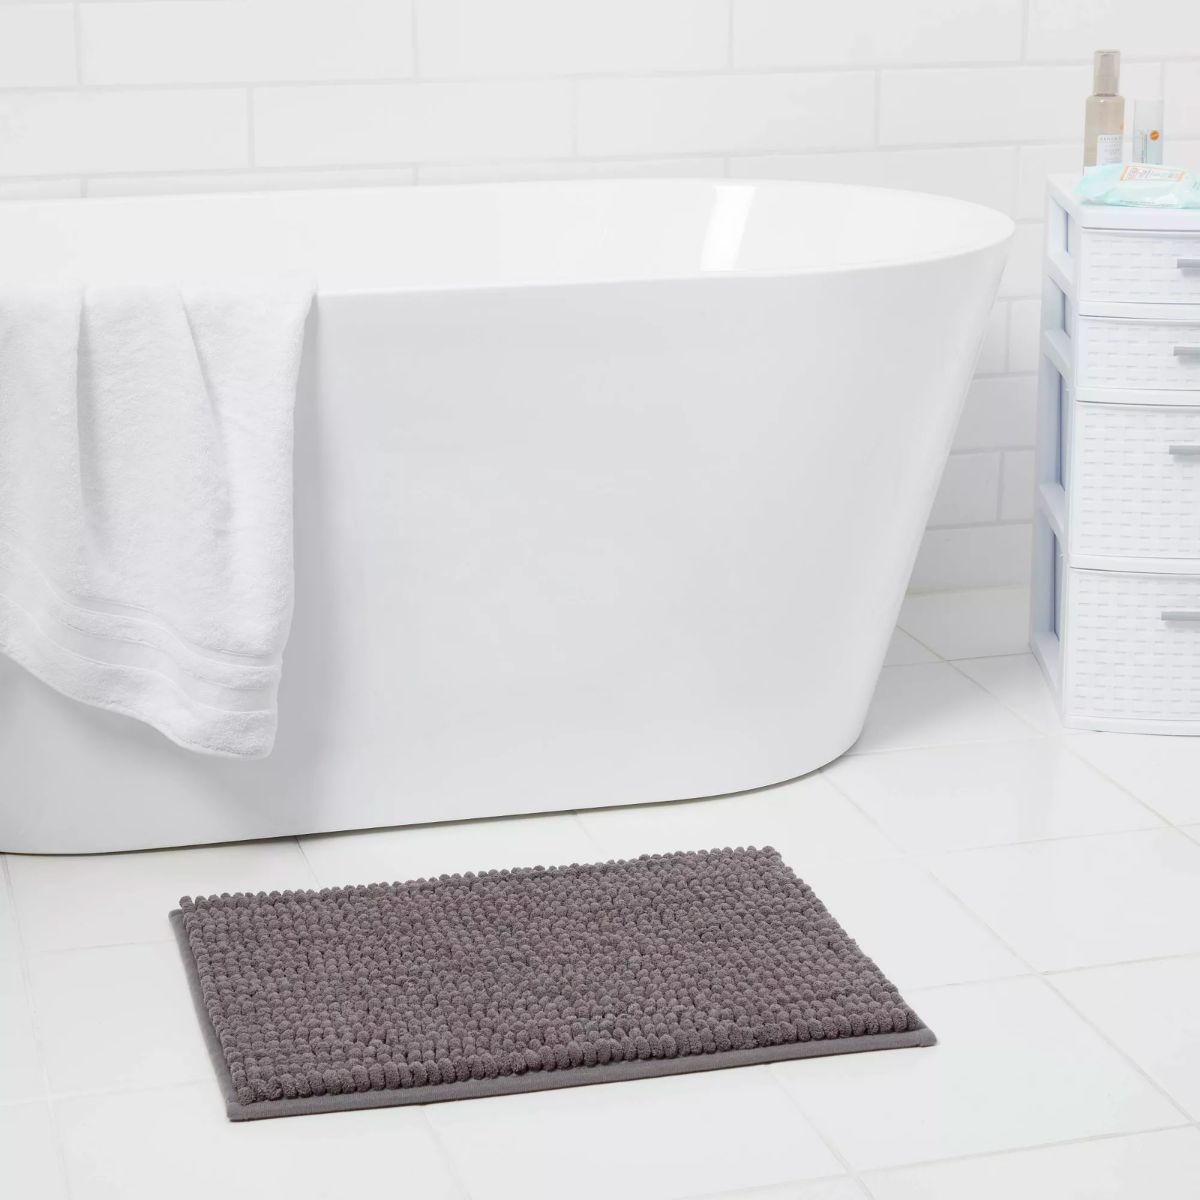 A gray Chunky Chenille Memory Foam Bath Rug in front of a soaking tub